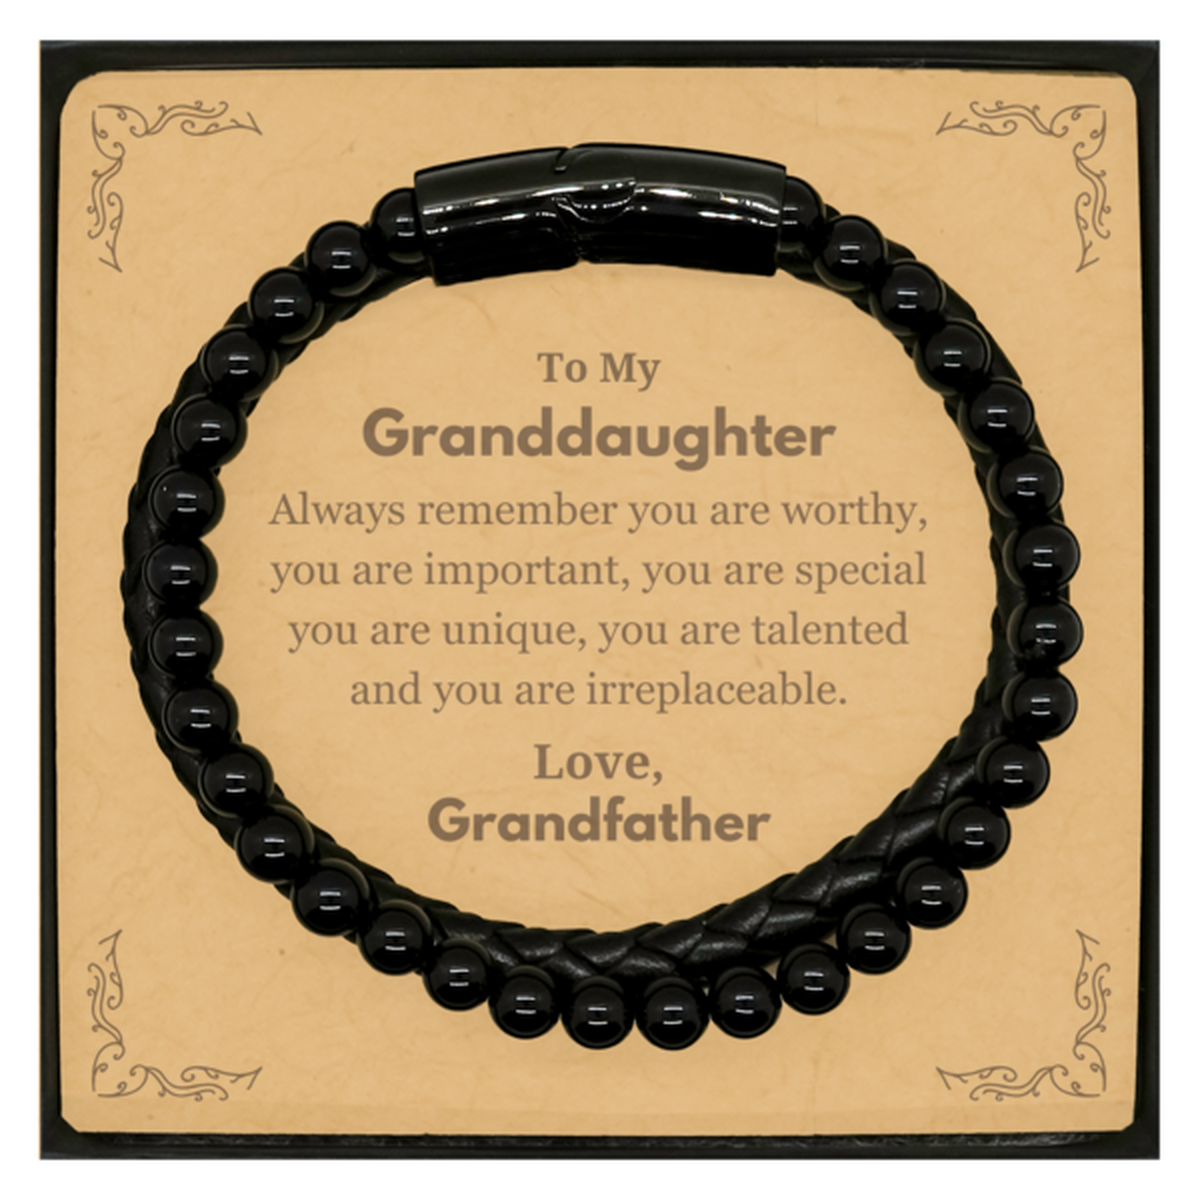 Granddaughter Birthday Gifts from Grandfather, Inspirational Stone Leather Bracelets for Granddaughter Christmas Graduation Gifts for Granddaughter Always remember you are worthy, you are important. Love, Grandfather